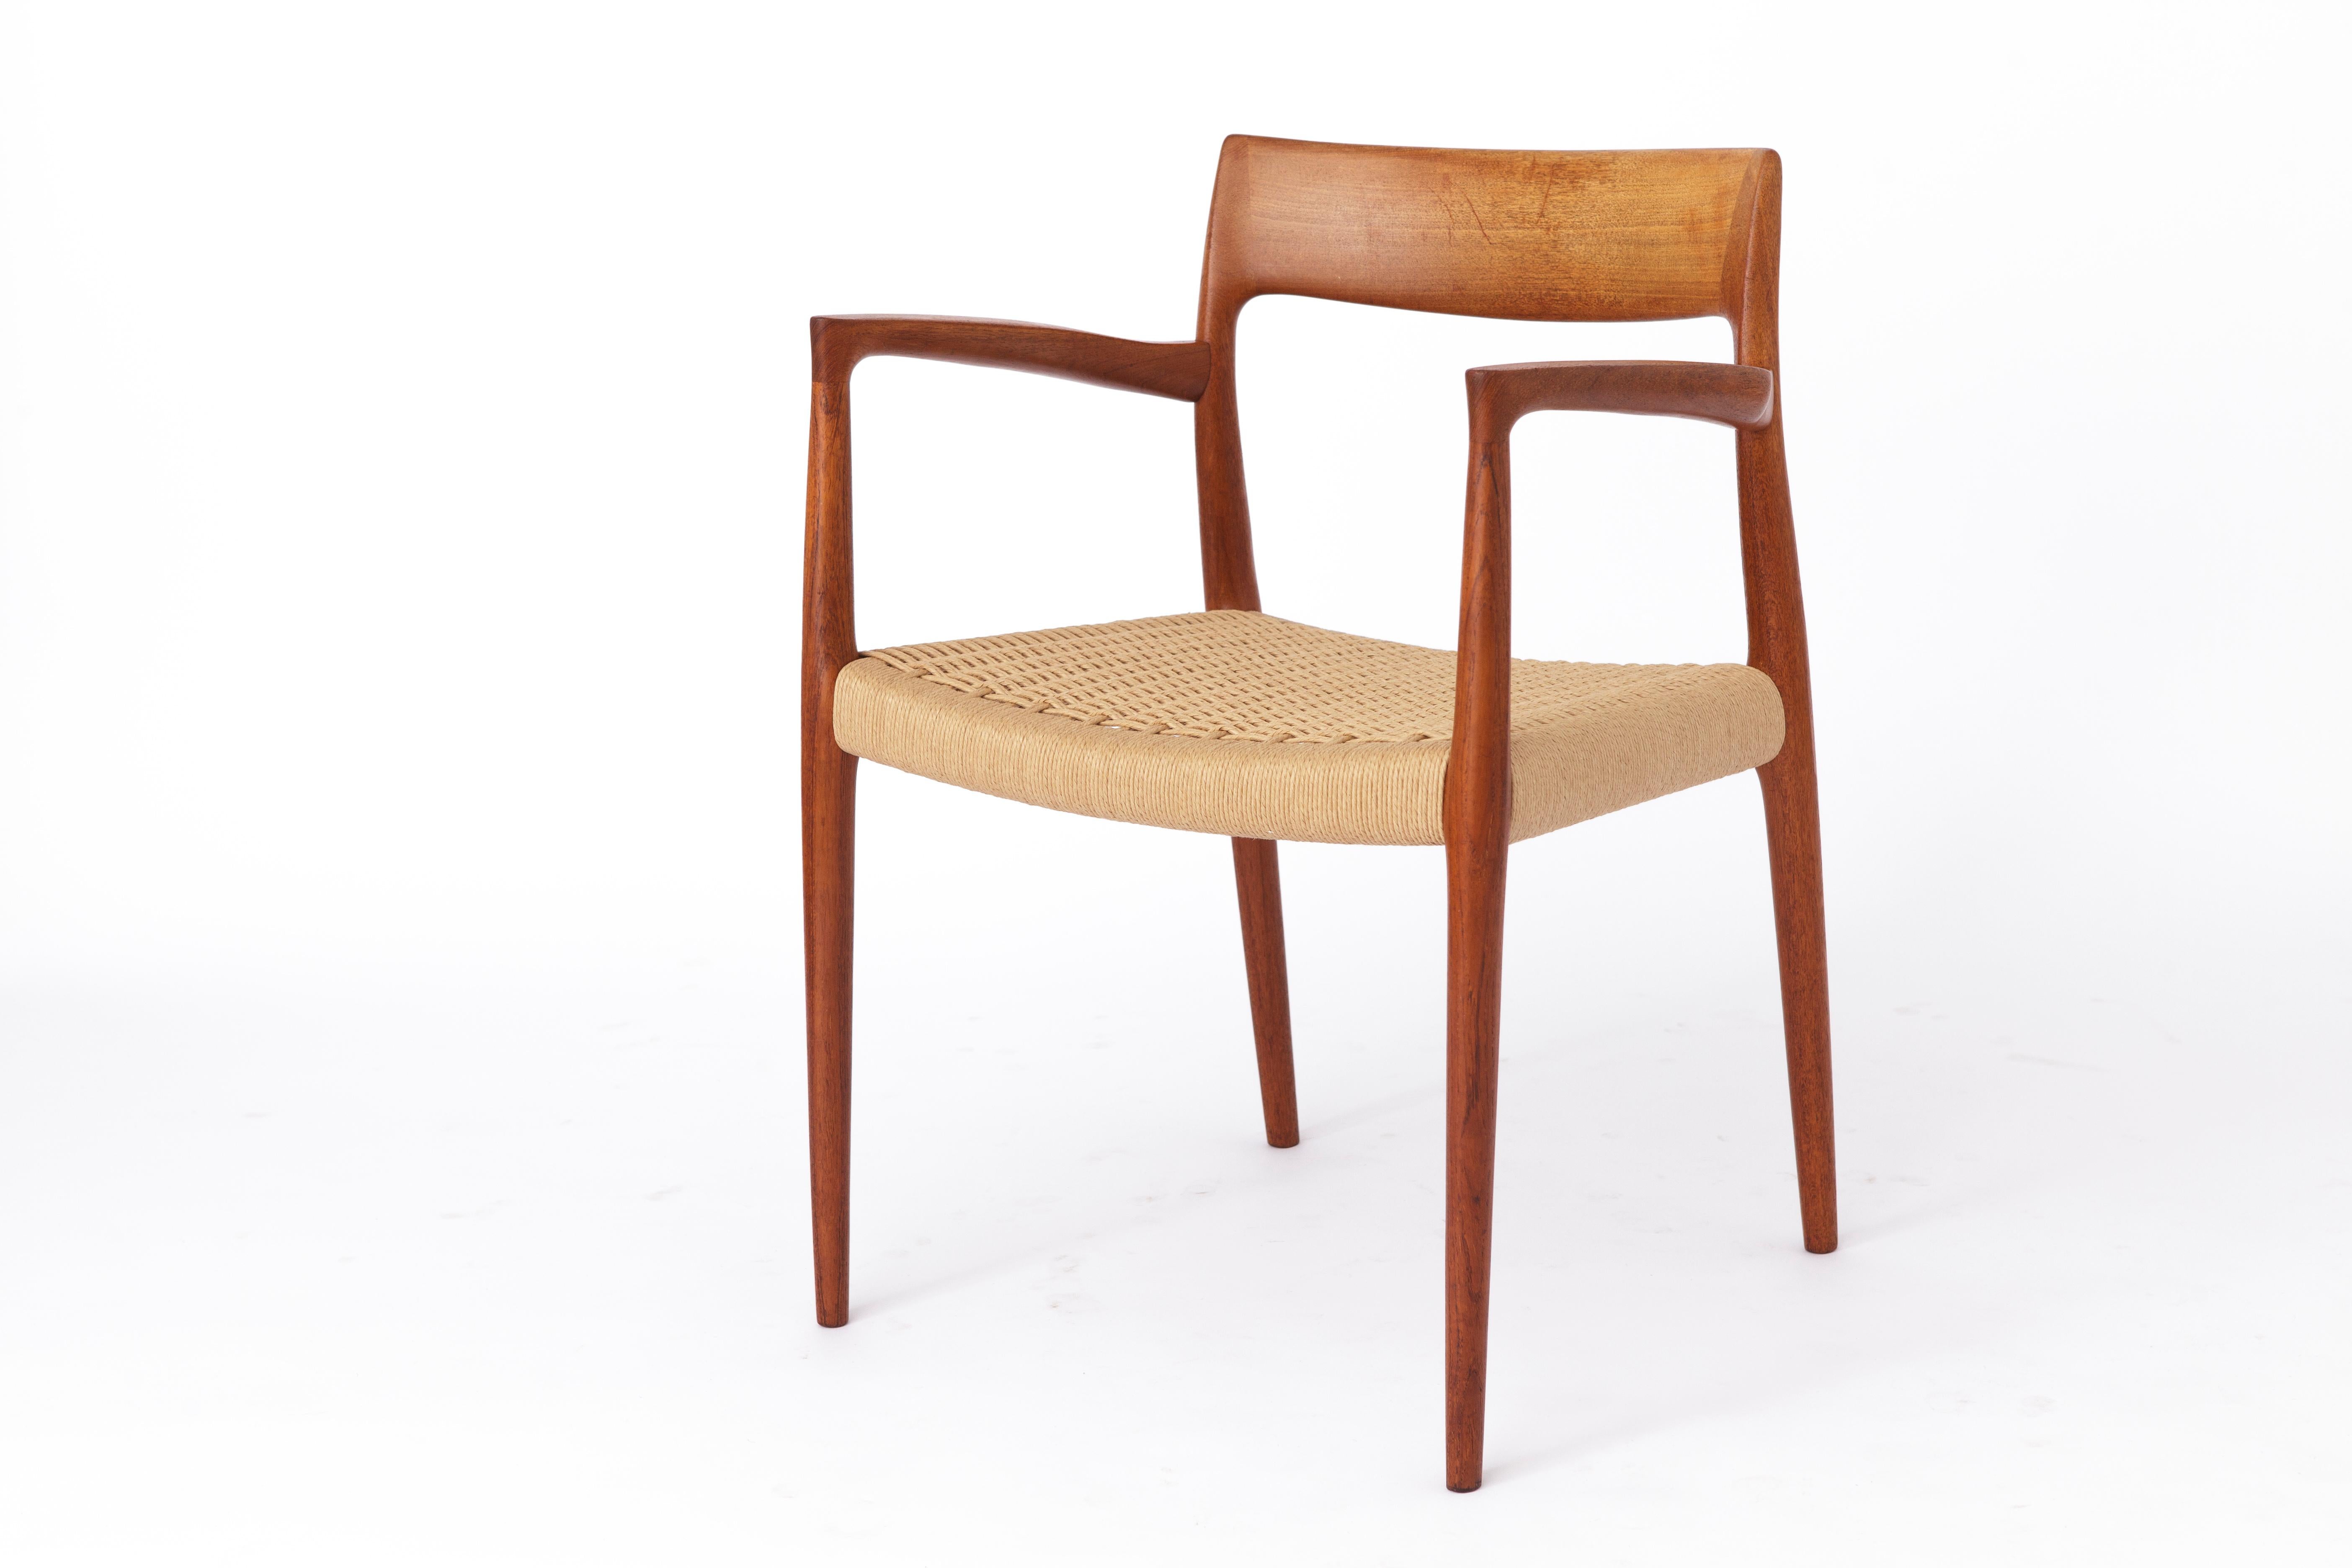 Danish Niels Moller armchair, model 57, 1950s Vintage, paper cord seat, dining chair For Sale